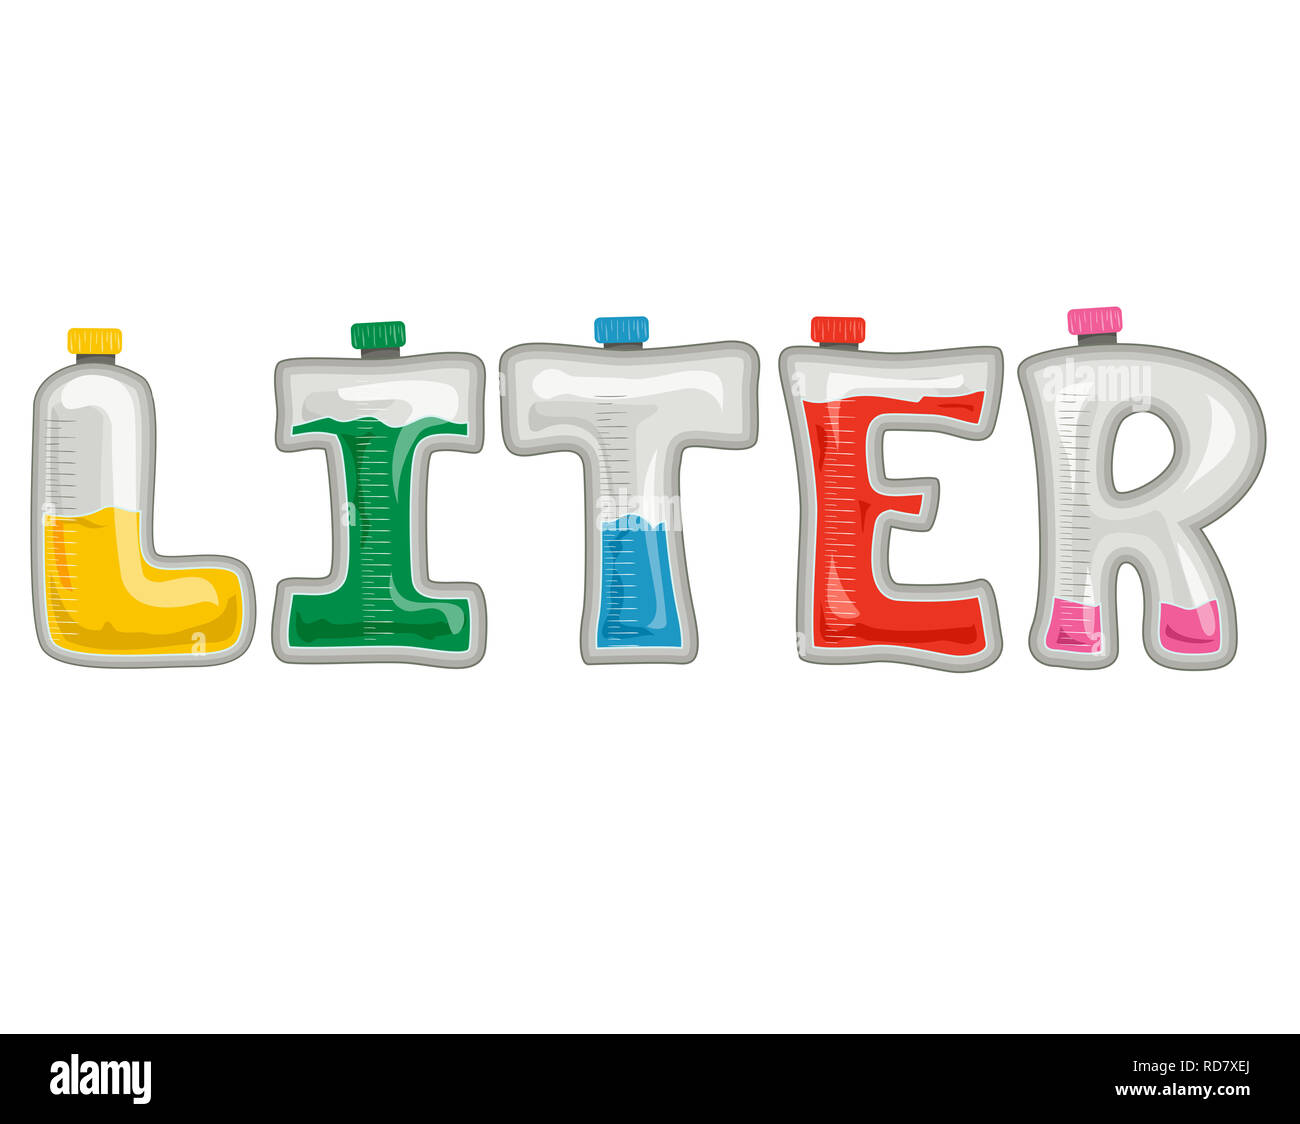 Illustration of Liter Lettering Containers with Colorful Liquid Inside Stock Photo